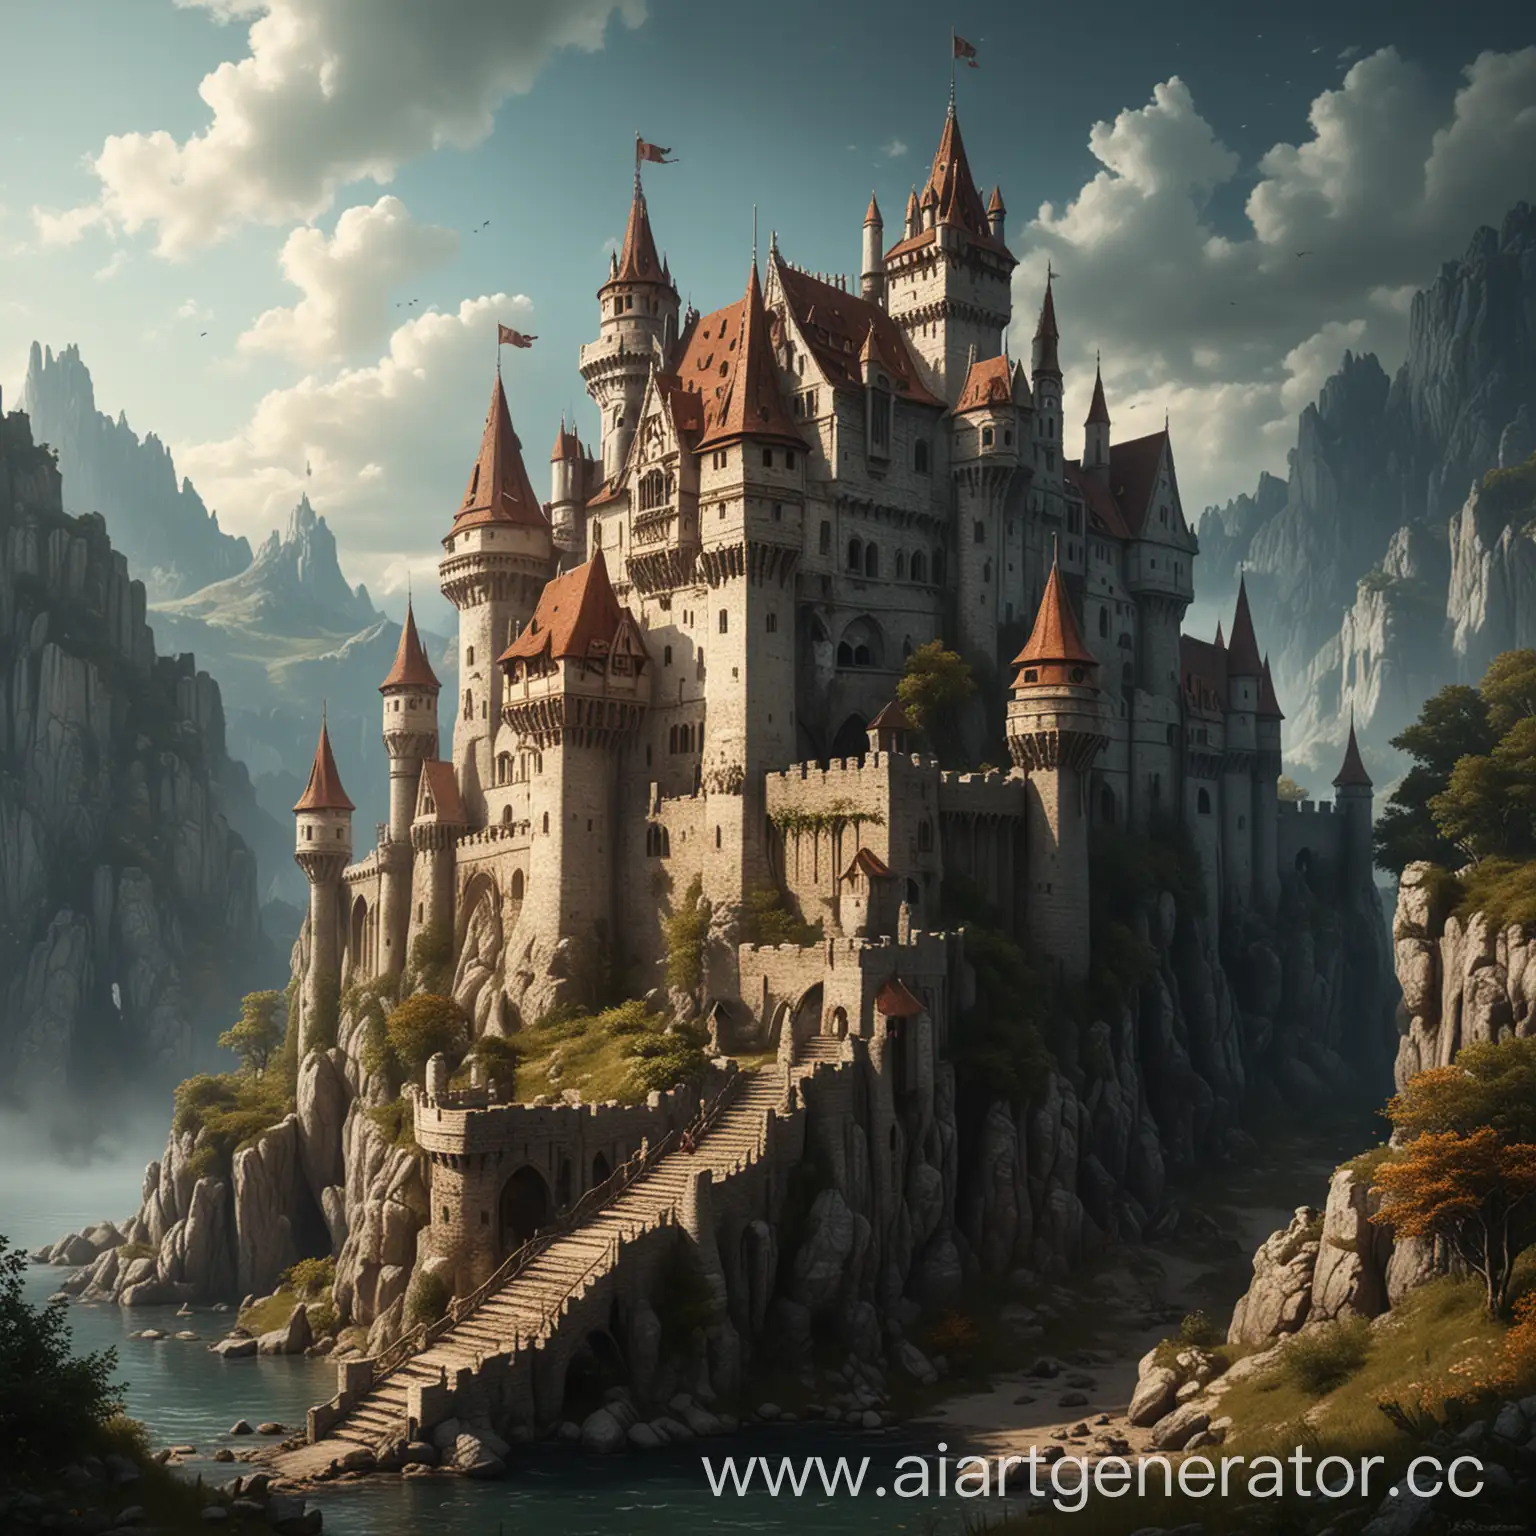 Enchanted-Medieval-Castle-Fantasy-Mystical-Fortress-in-a-Magical-Realm